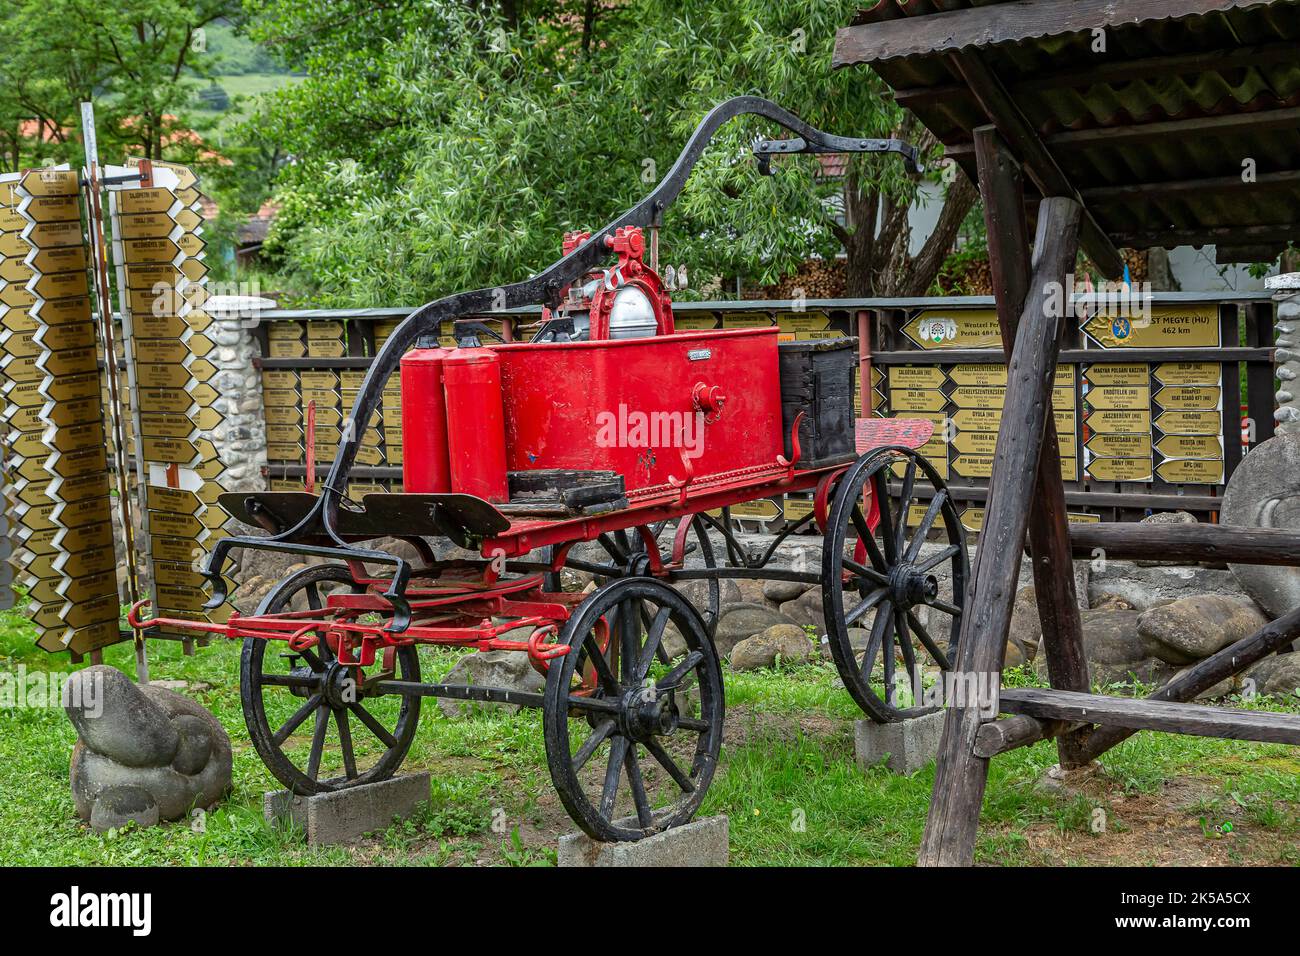 CRISENI, HARGHITA, ROMANIA-JUNE 20: Old fire truck - decoration in the courtyard of the Straw hat museum on June 20, 2021 in Criseni, Harghita. Stock Photo